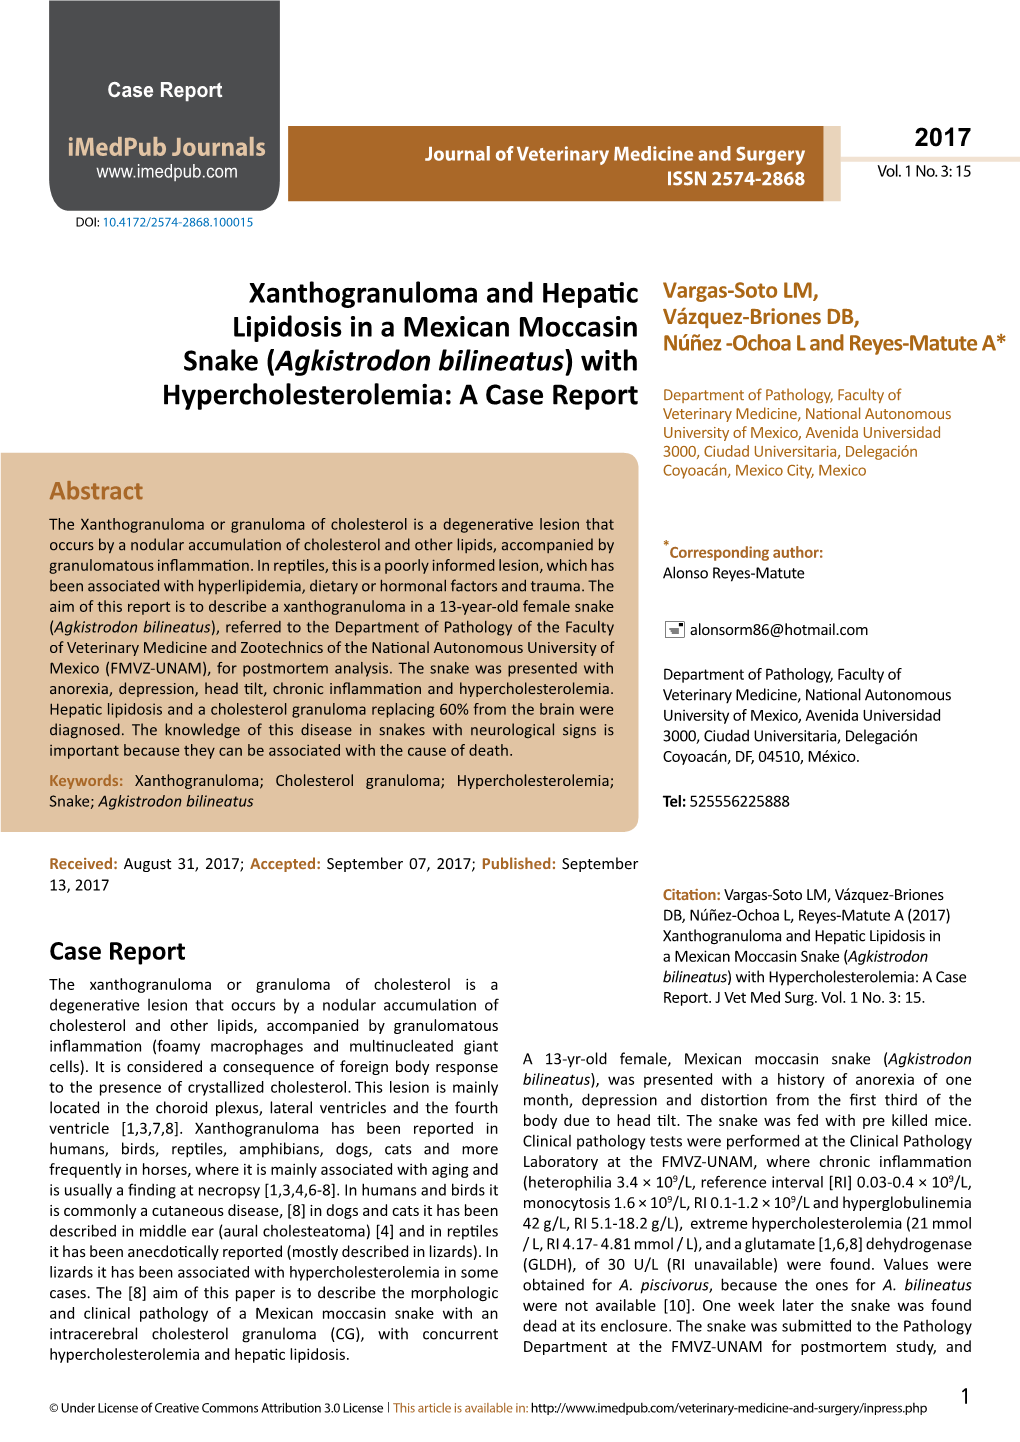 Xanthogranuloma and Hepatic Lipidosis in a Mexican Moccasin Snake (Agkistrodon Bilineatus) with Hypercholesterolemia: a Case